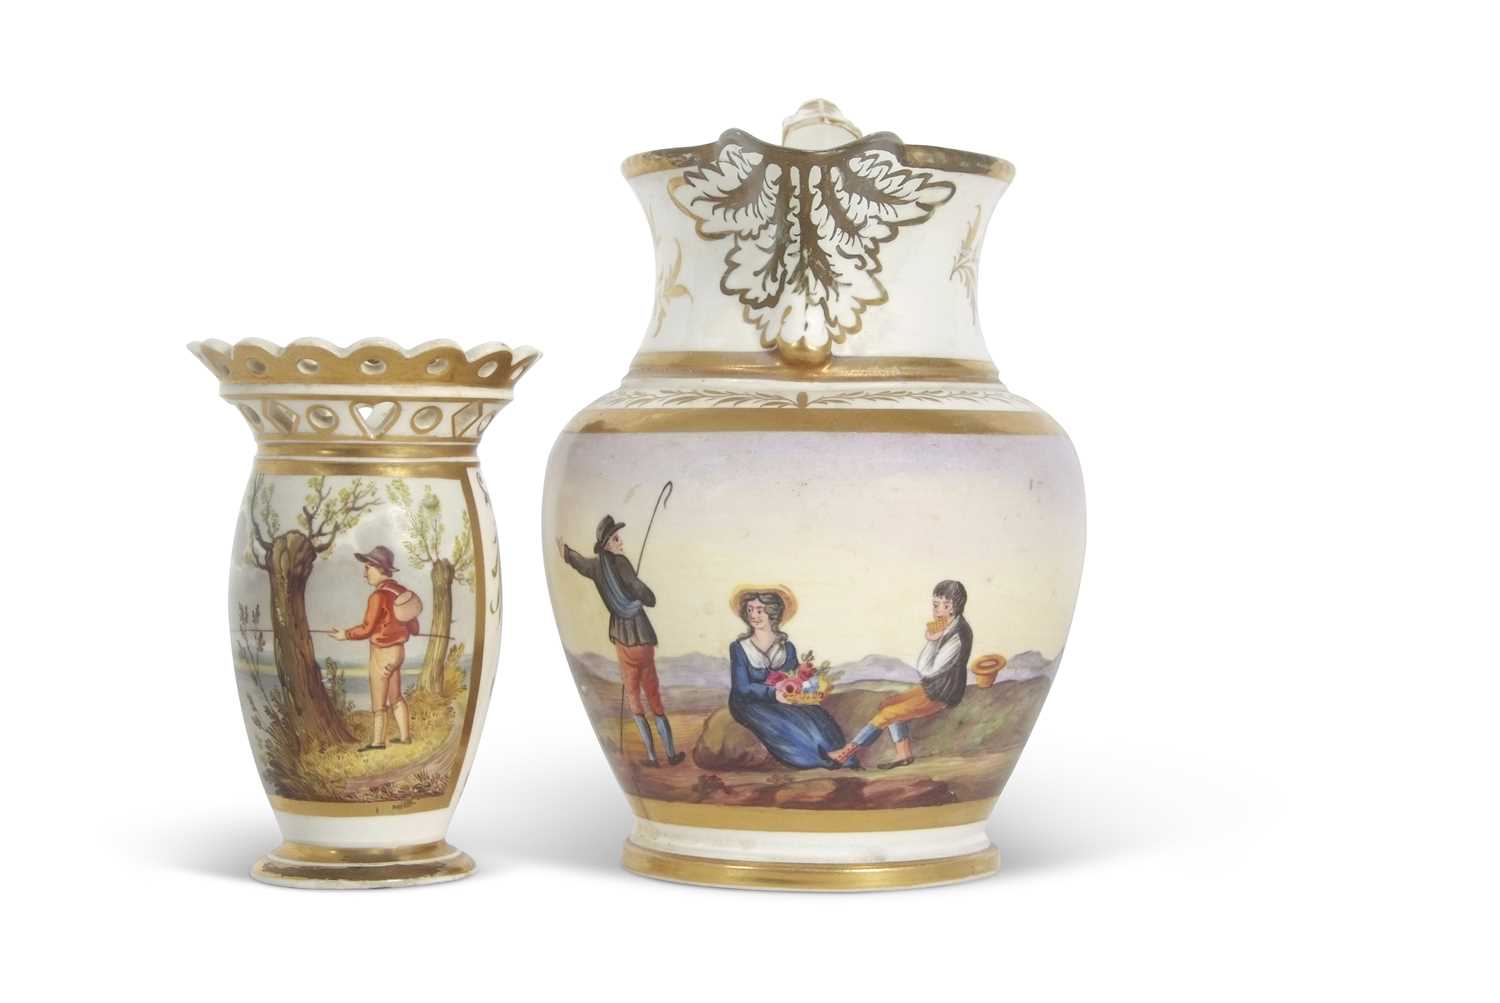 Early 19th Century jug painted with a pastoral scene of figures in a landscape with guilded floral